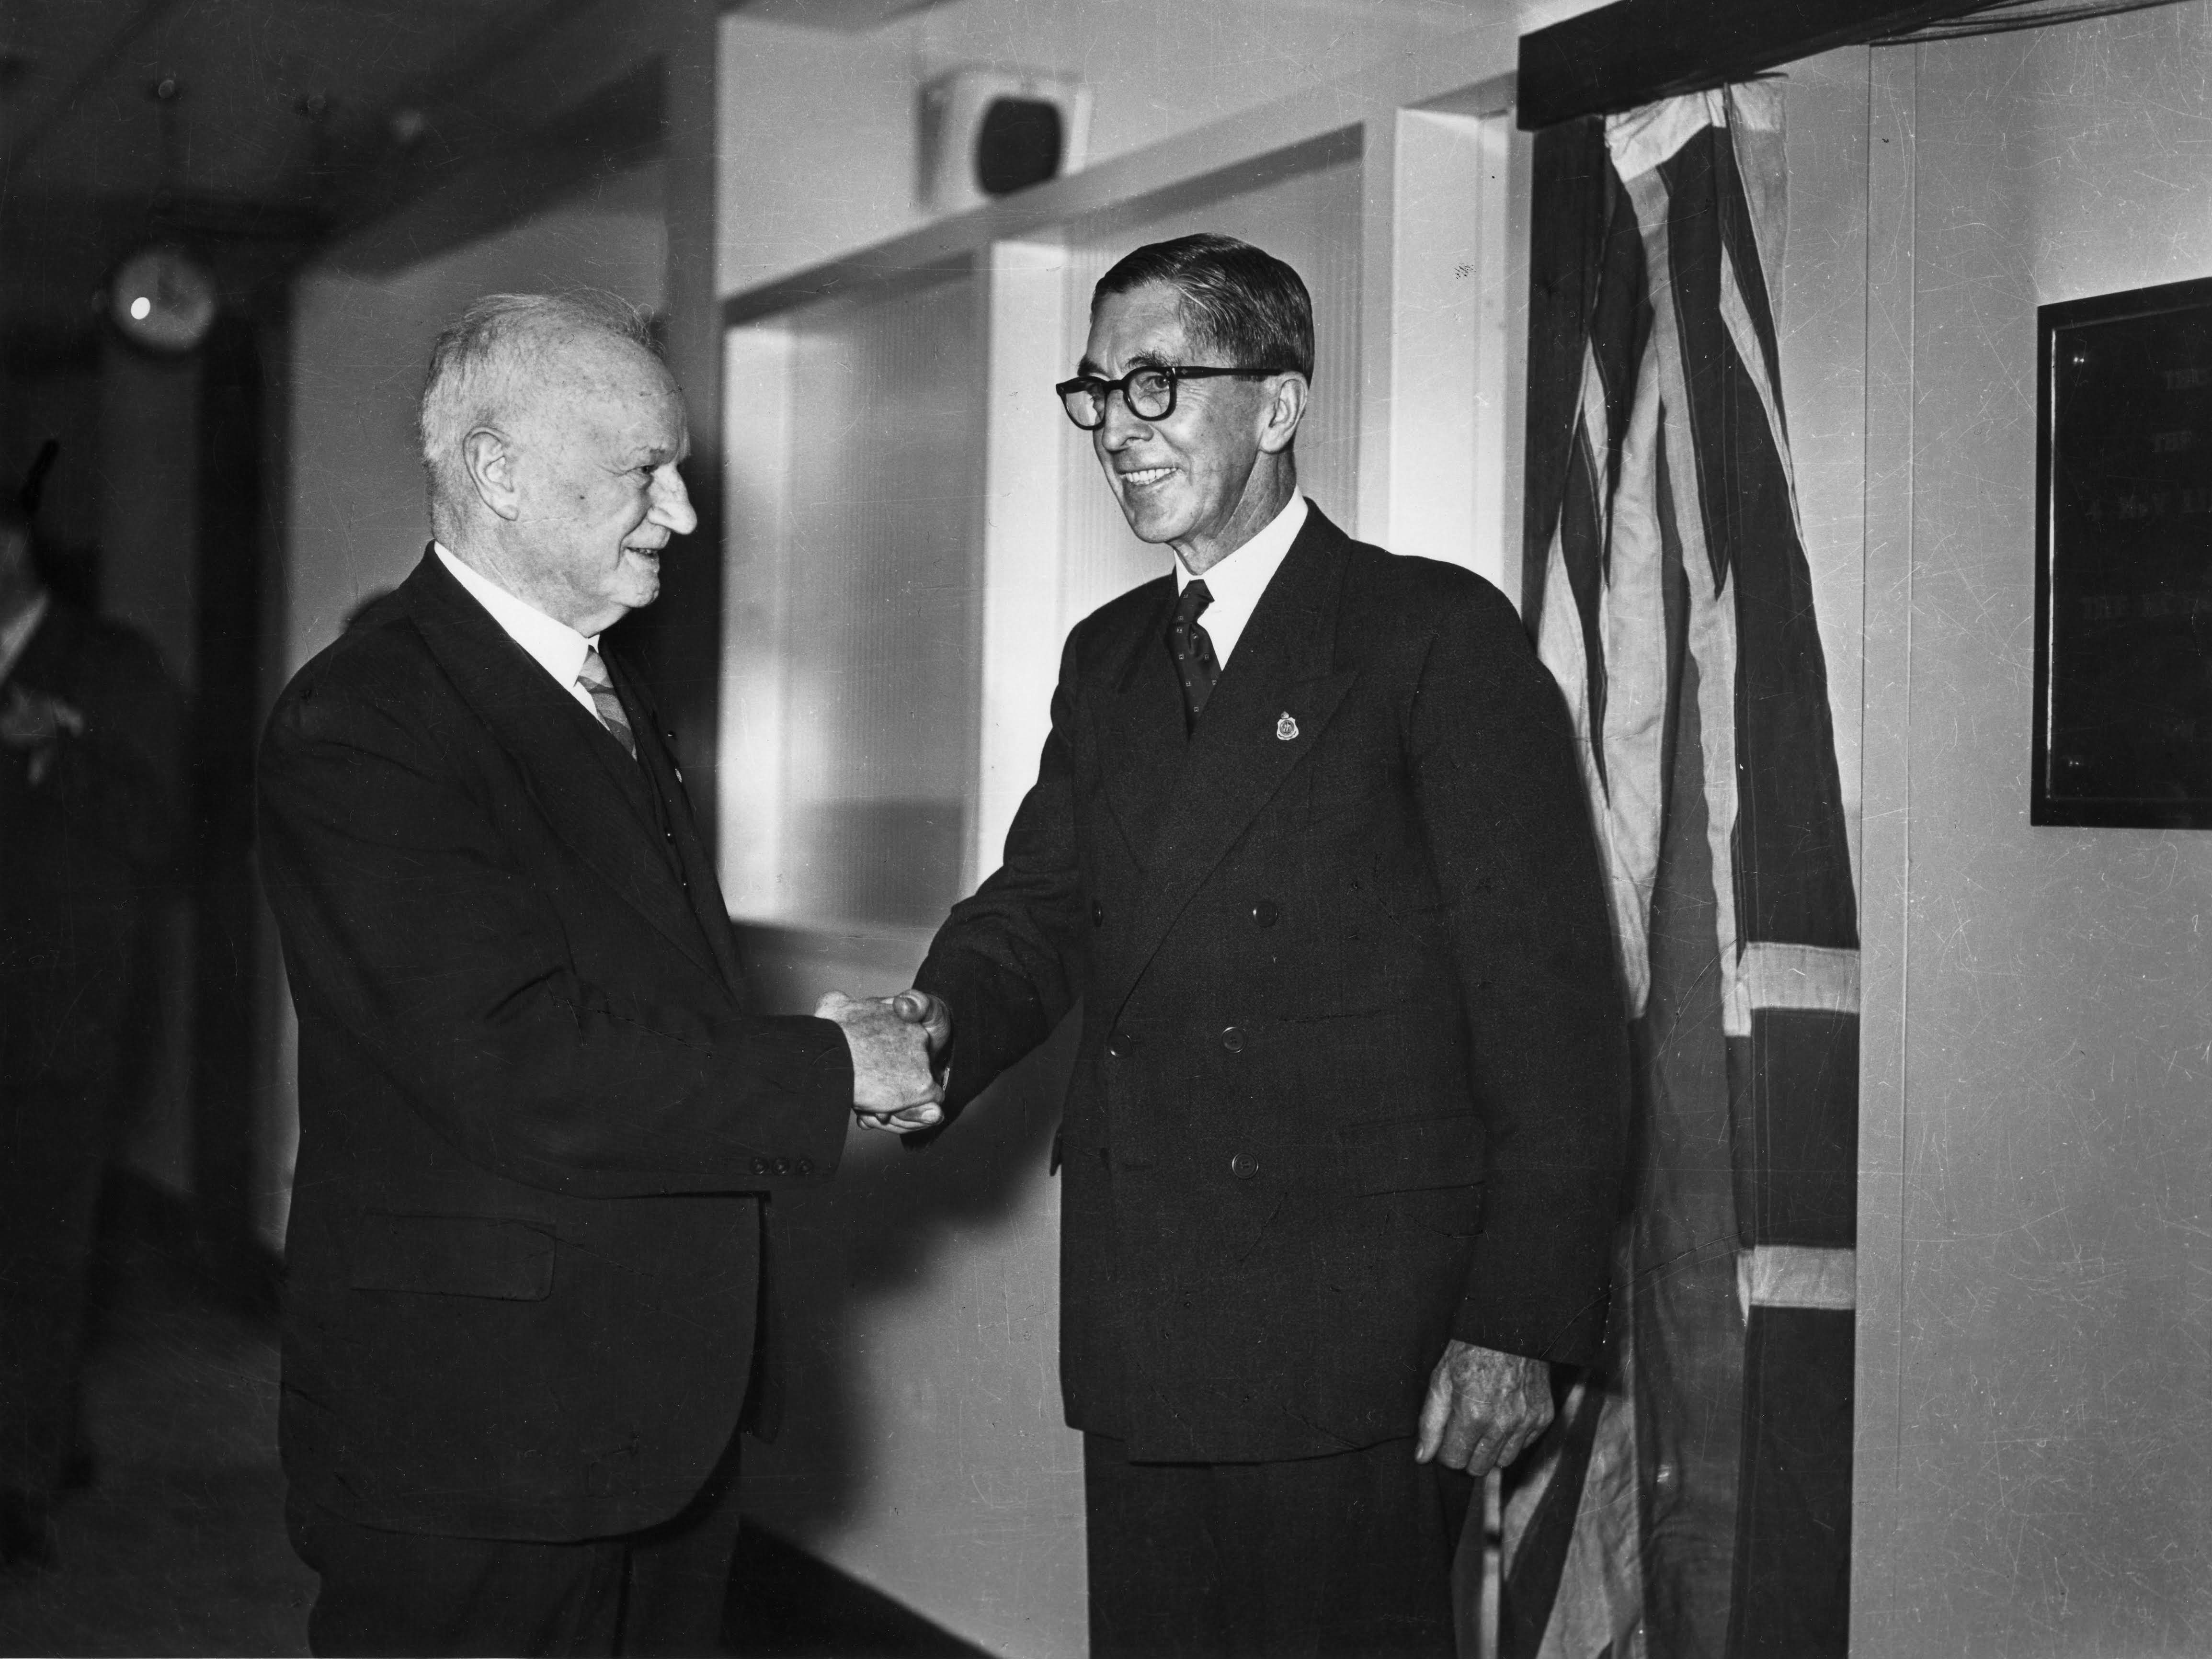 Sir Peter MacCallum with the Victorian Minister for Health, Ewen Paul Cameron MP. This photo is of the opening of the first Linear Accelerator, in 1956.